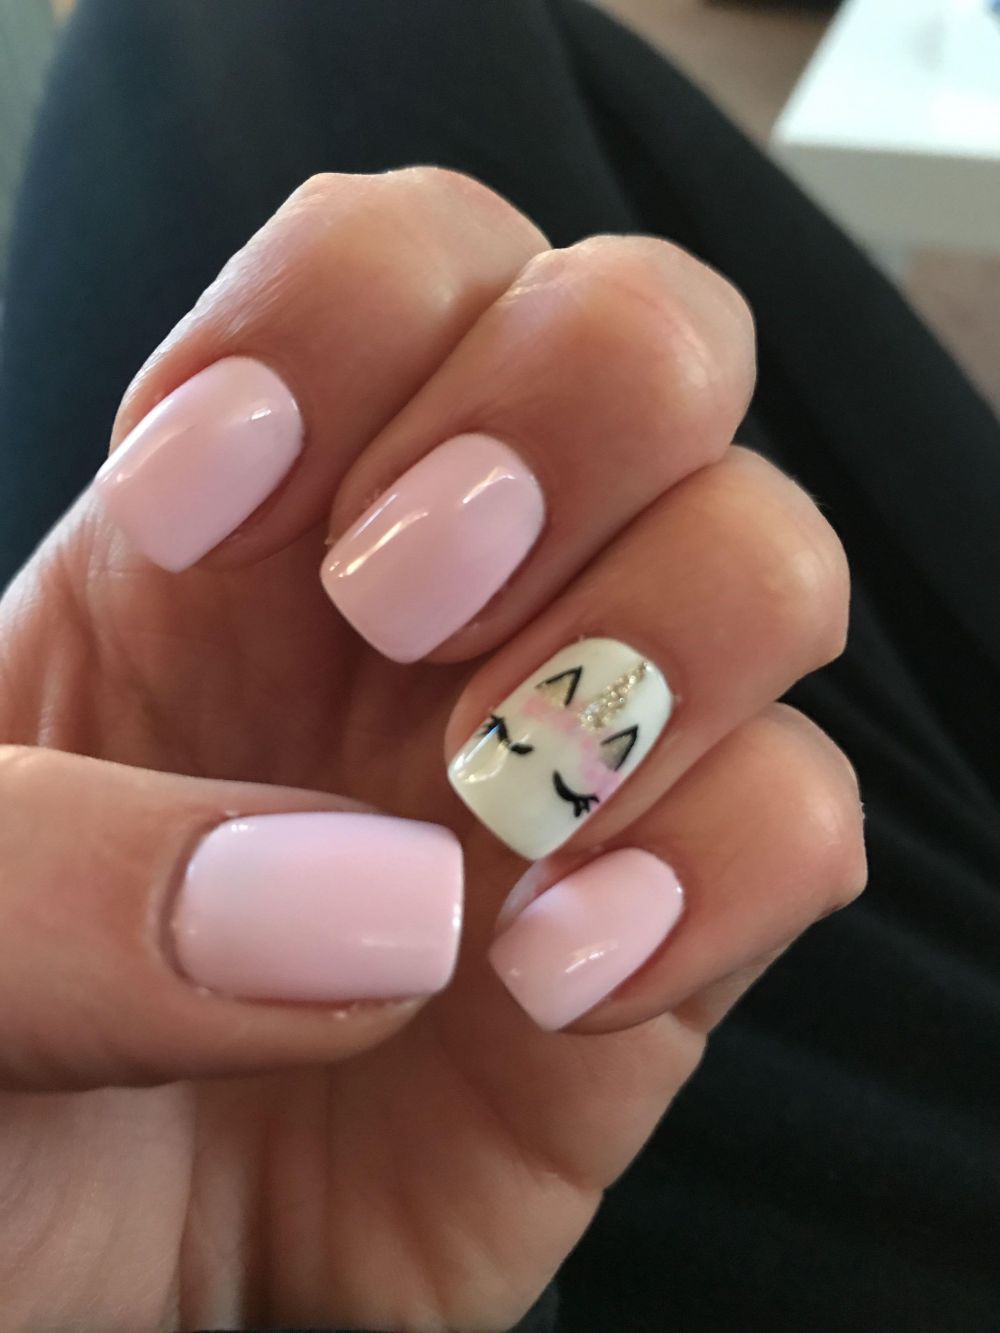 43 Wedding Nails That'll Have You Saying 